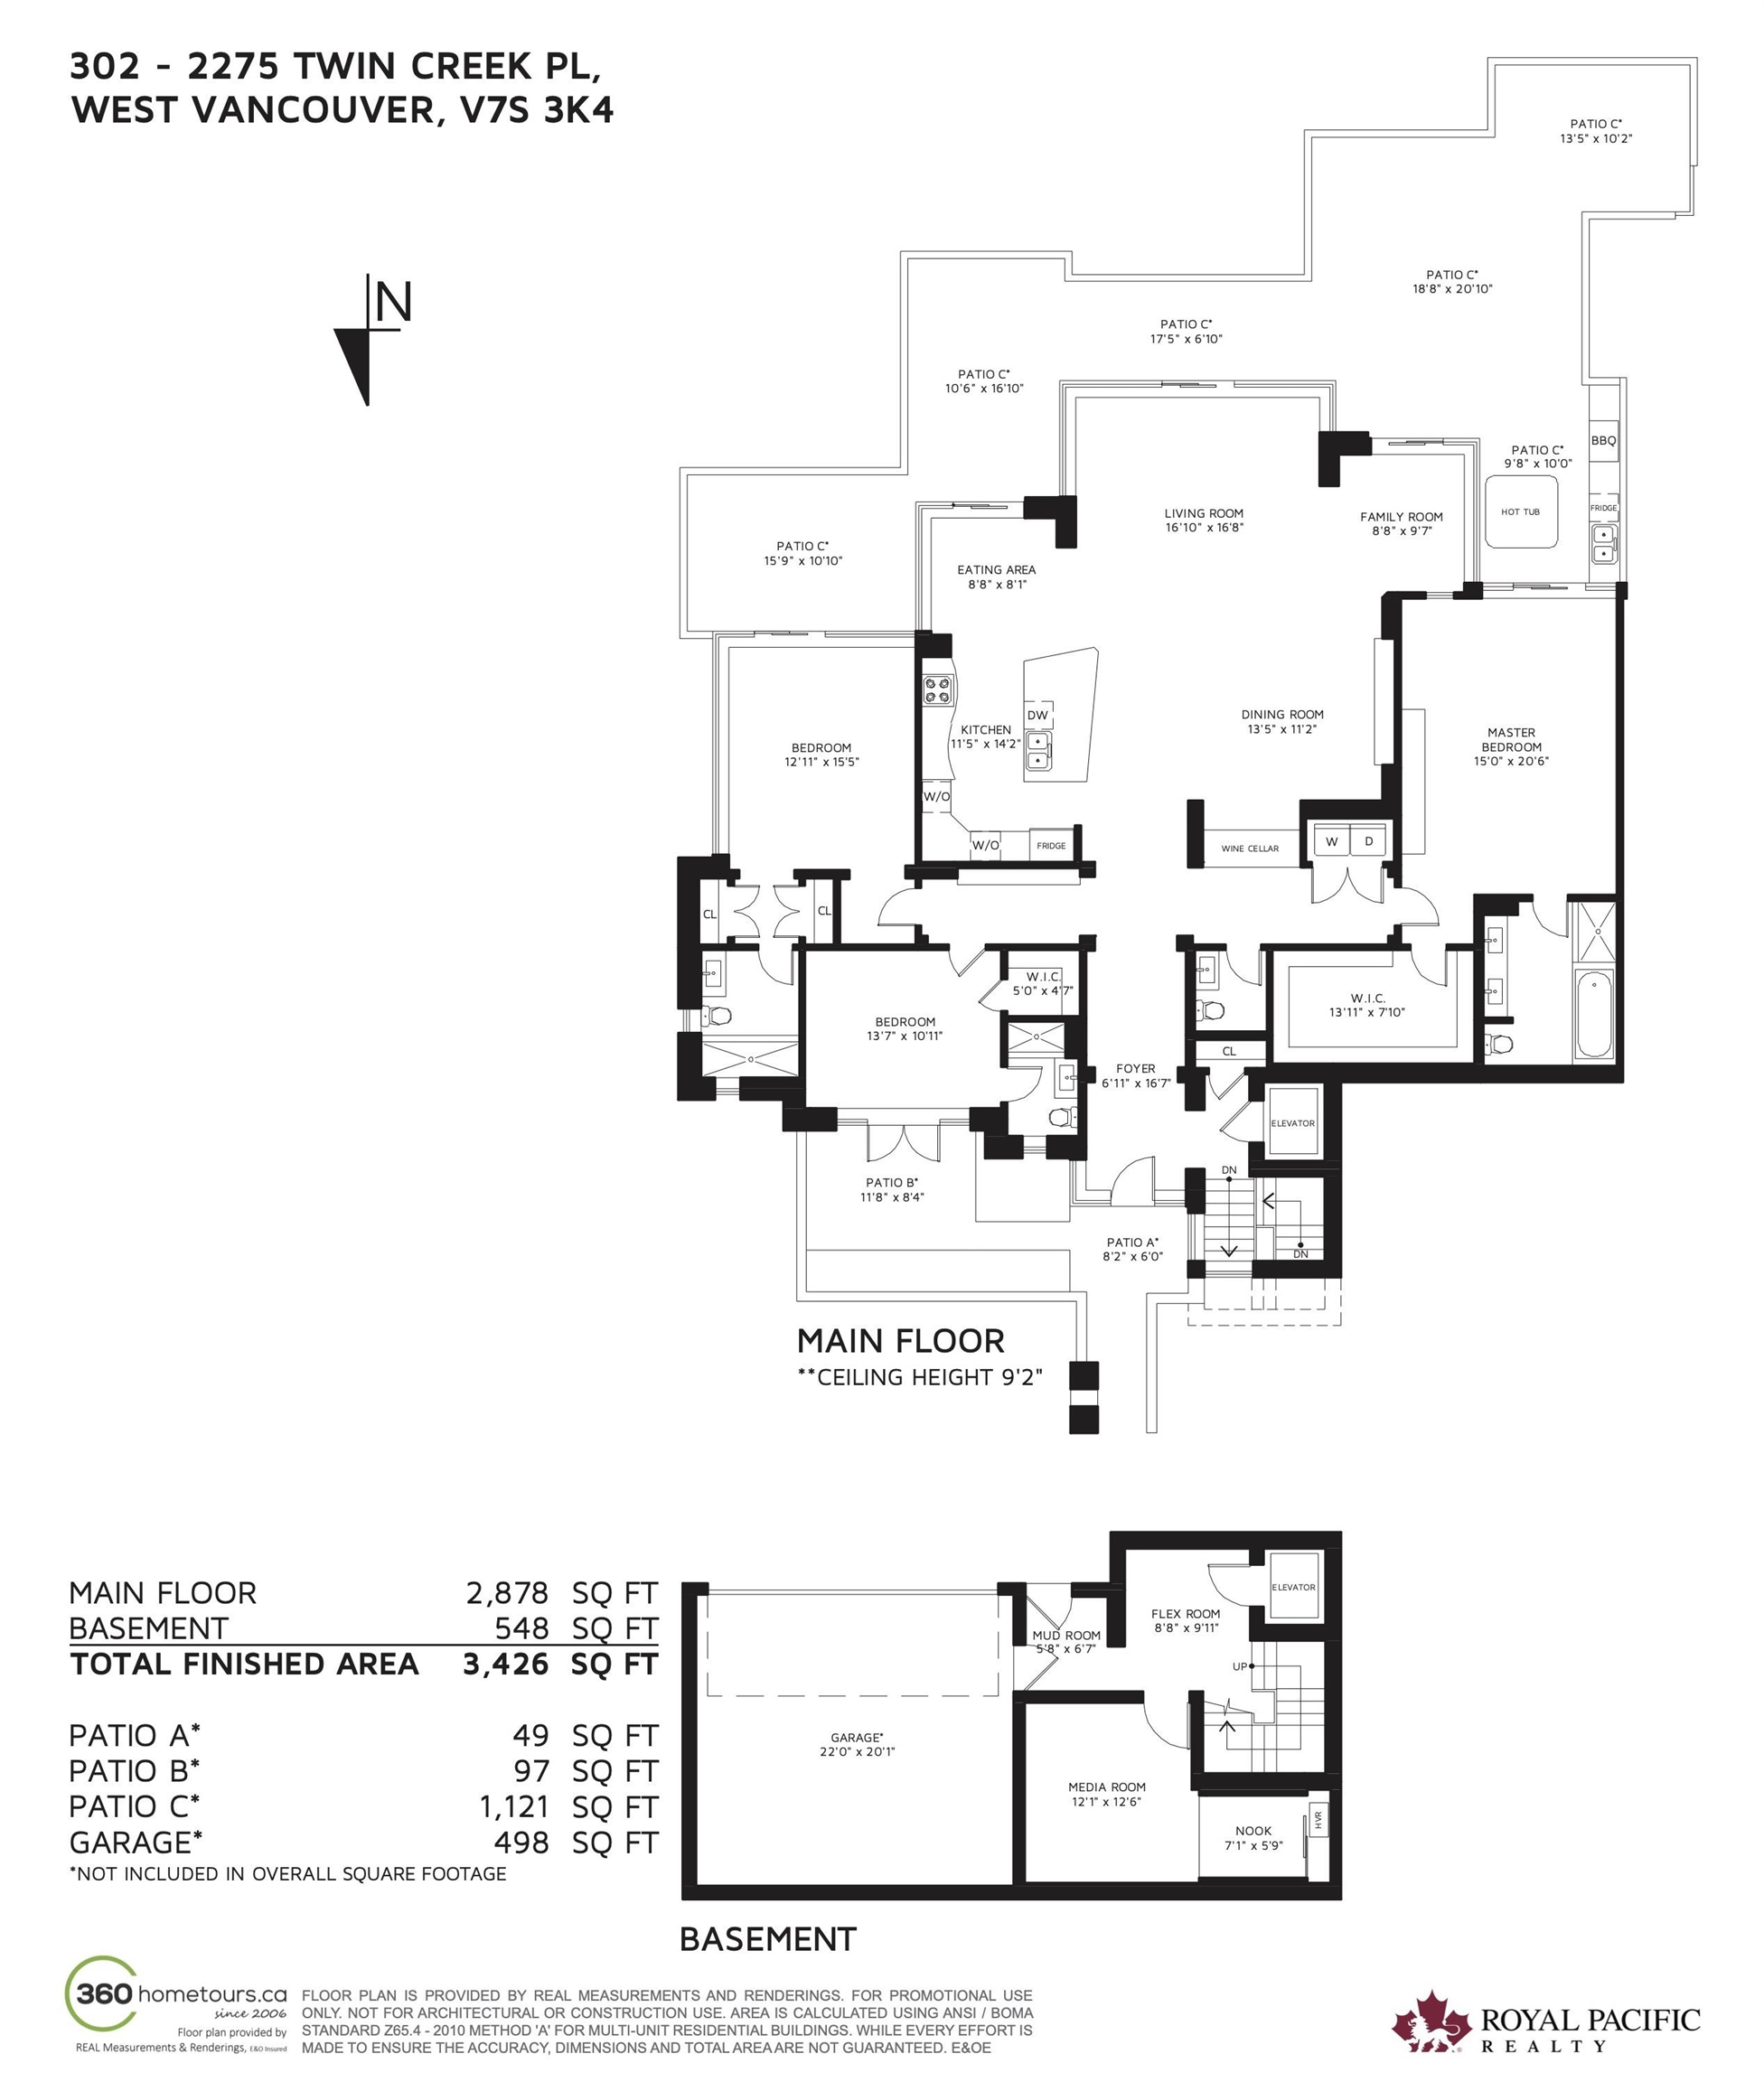 Listing image of 302 2275 TWIN CREEK PLACE